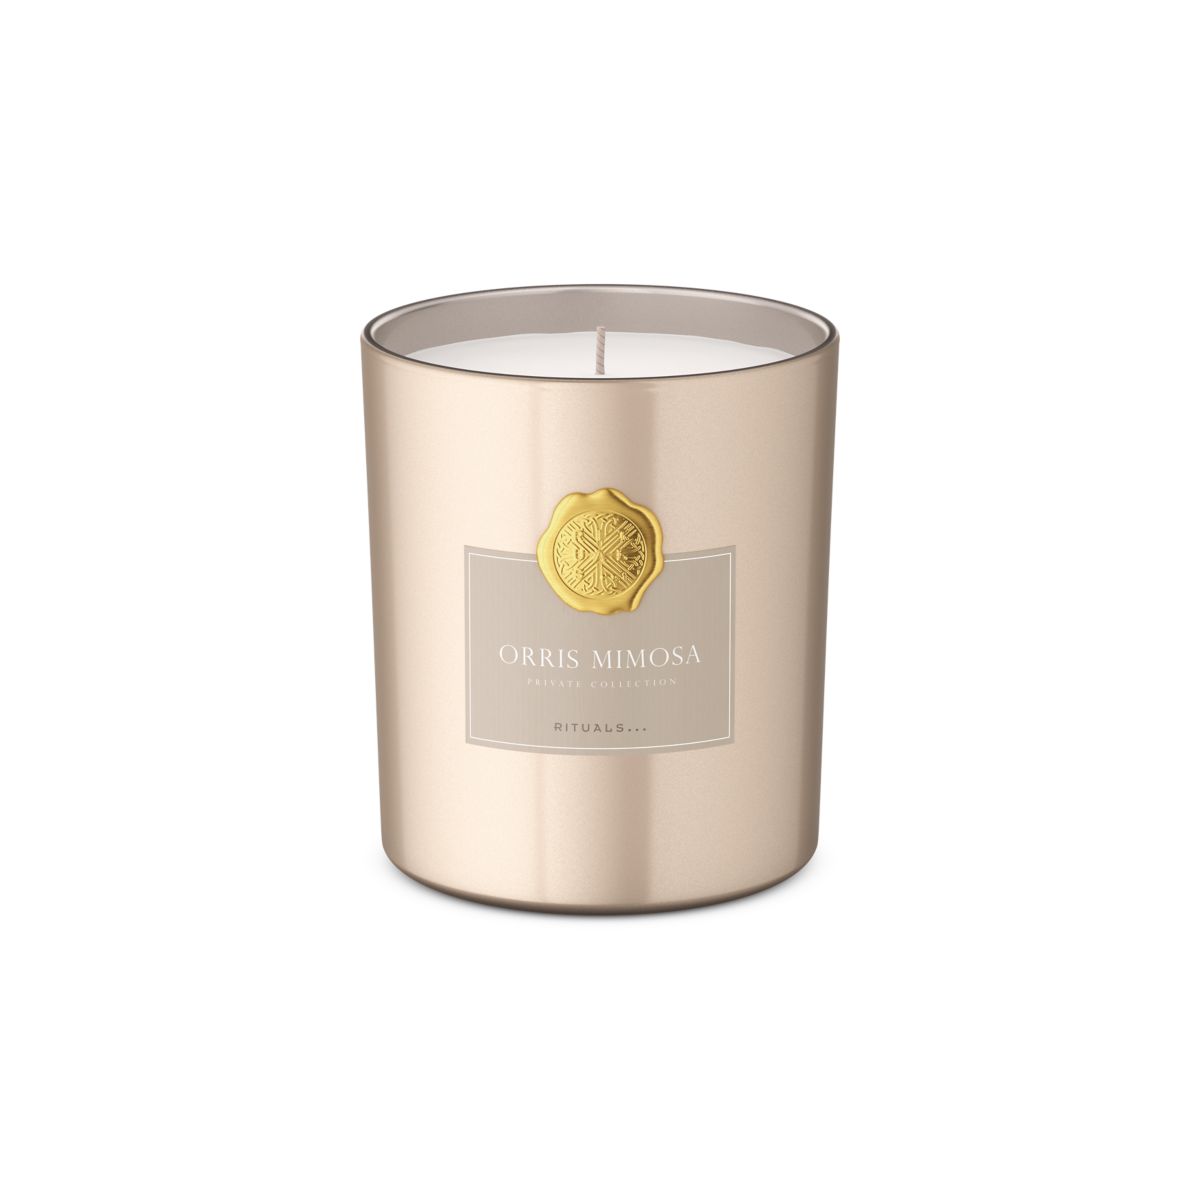 Rituals Luxury Scented Candle - Orris